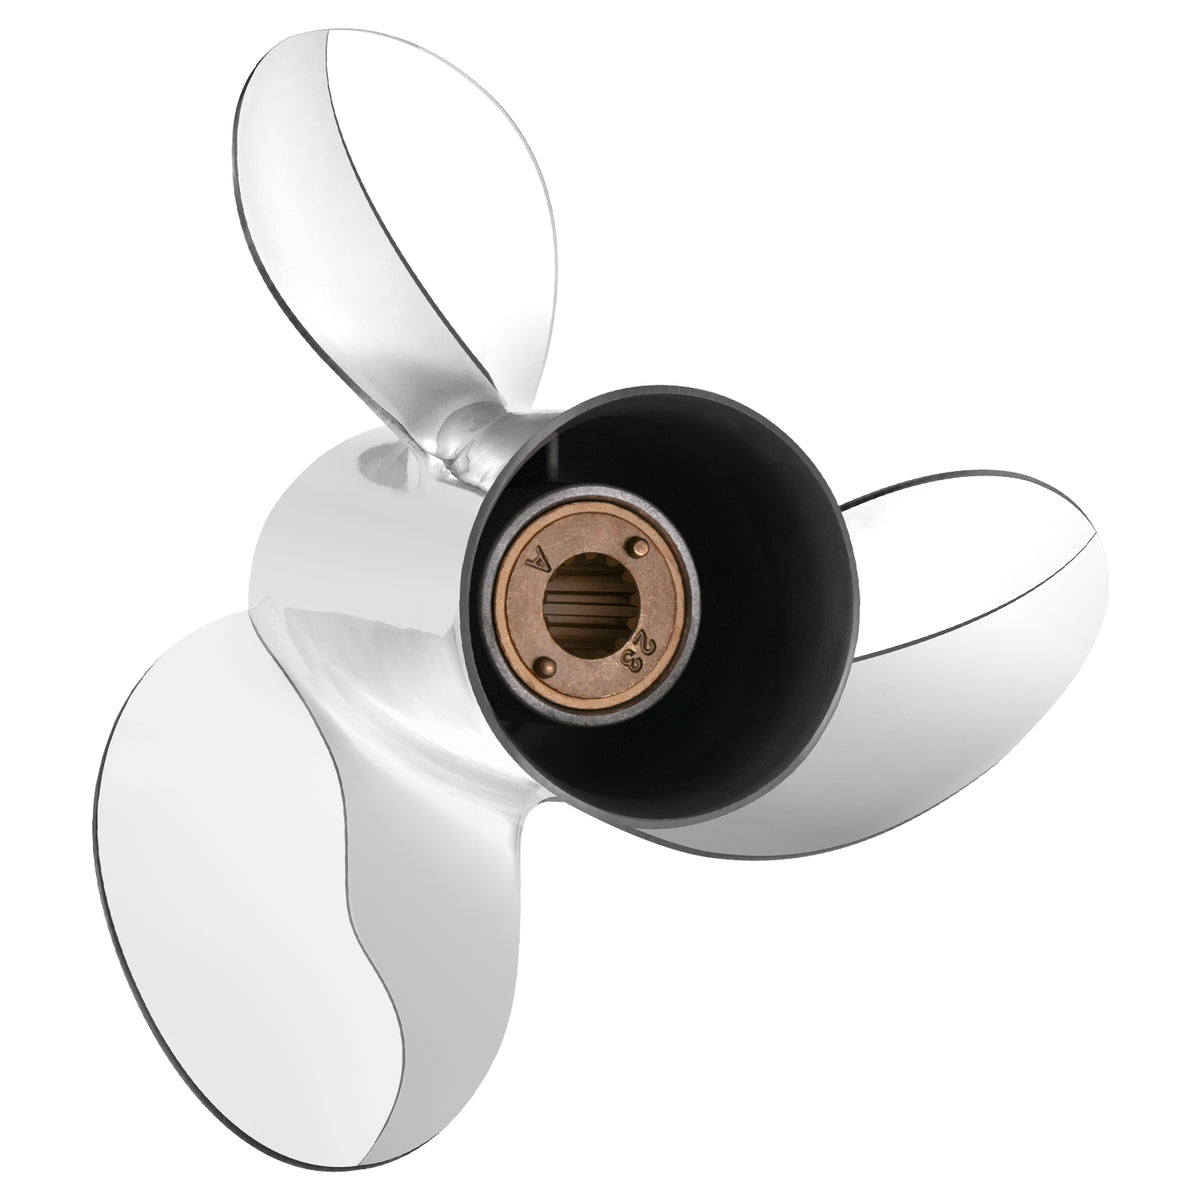 10.5 x 15 Stainless Steel Propeller Turbo for Mercury Outboard 25-70 HP ,13 Spline Tooth,RH